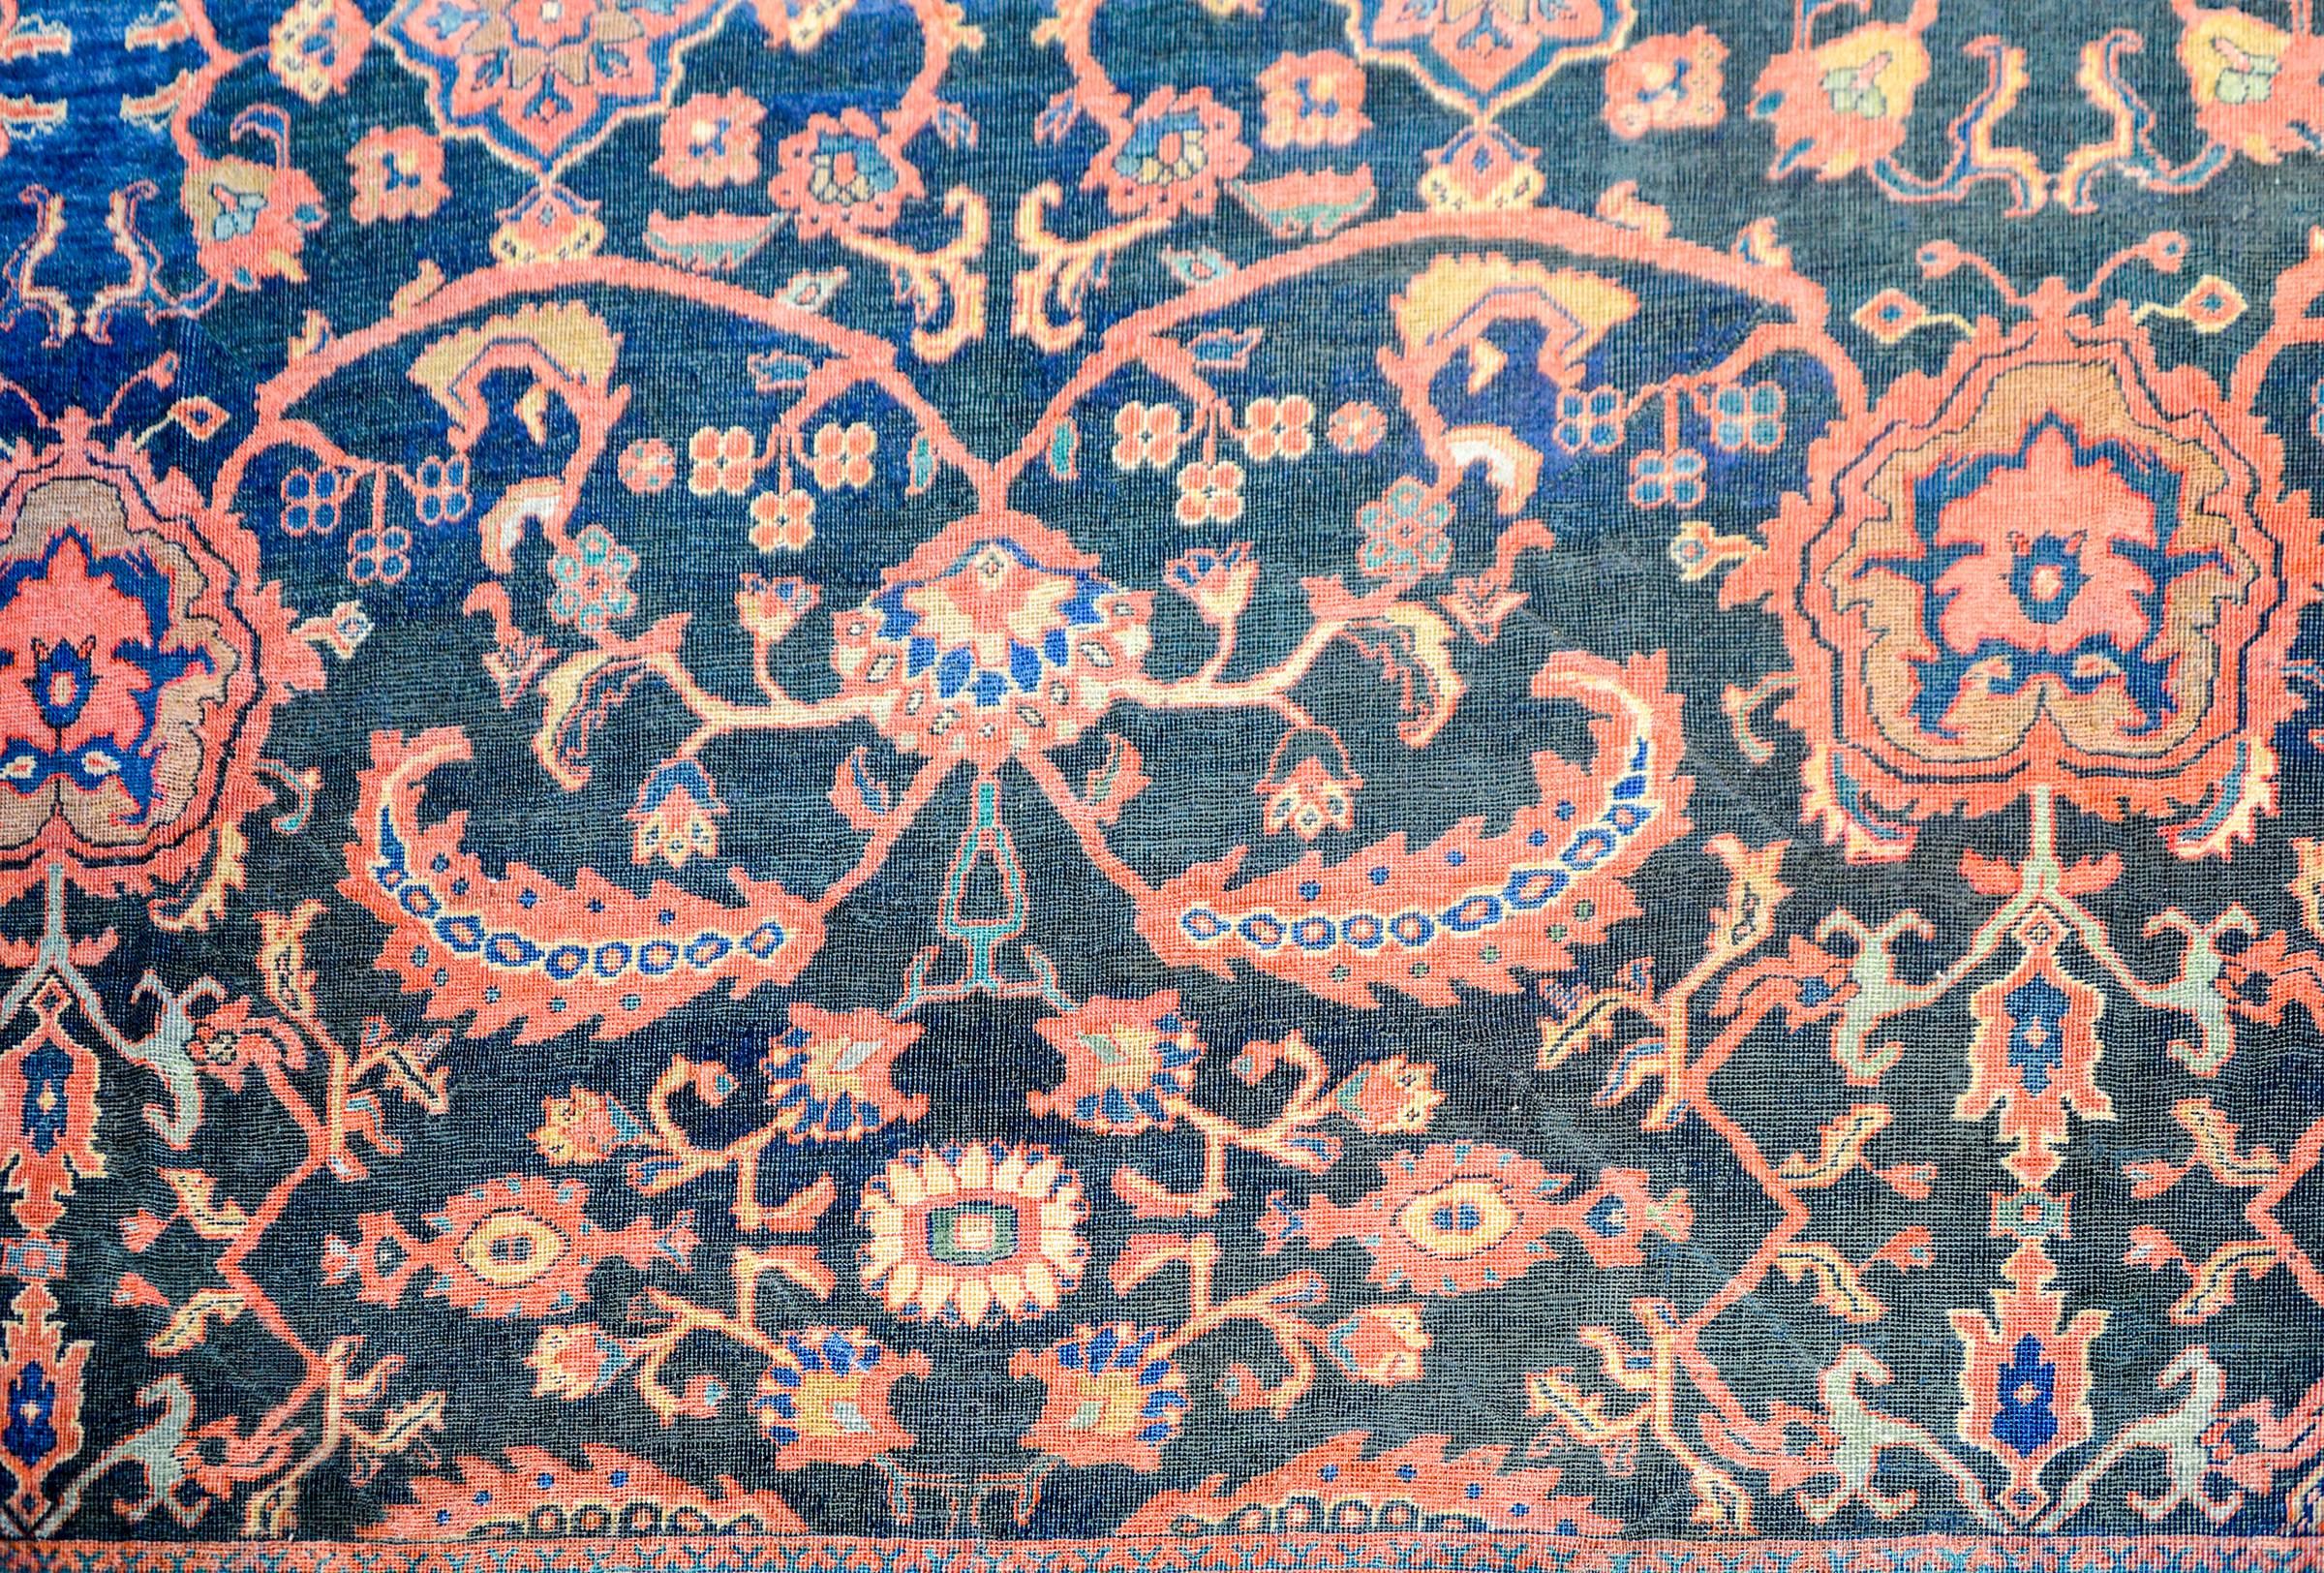 An extraordinary early 20th century Persian Mahal rug with an amazing all-over pattern of multicolored flowers in a wonderful lattice pattern on an indigo background. The wide border is composed with scrolling vines criss-crossing a garden of